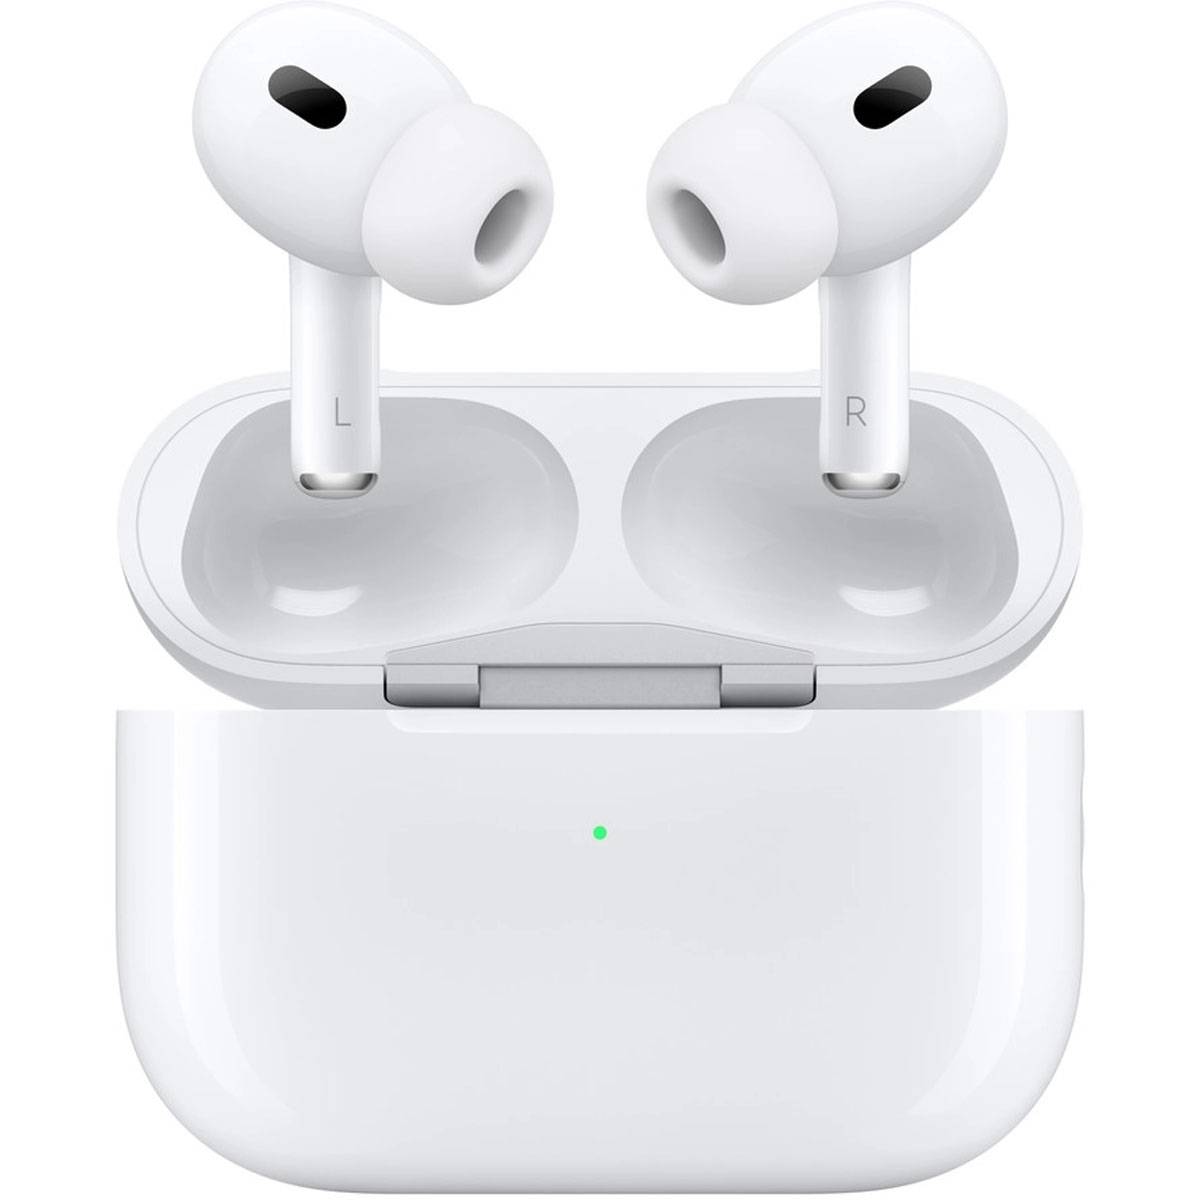 apple airpods - Apple AirPod Pro 2nd Generation Copy